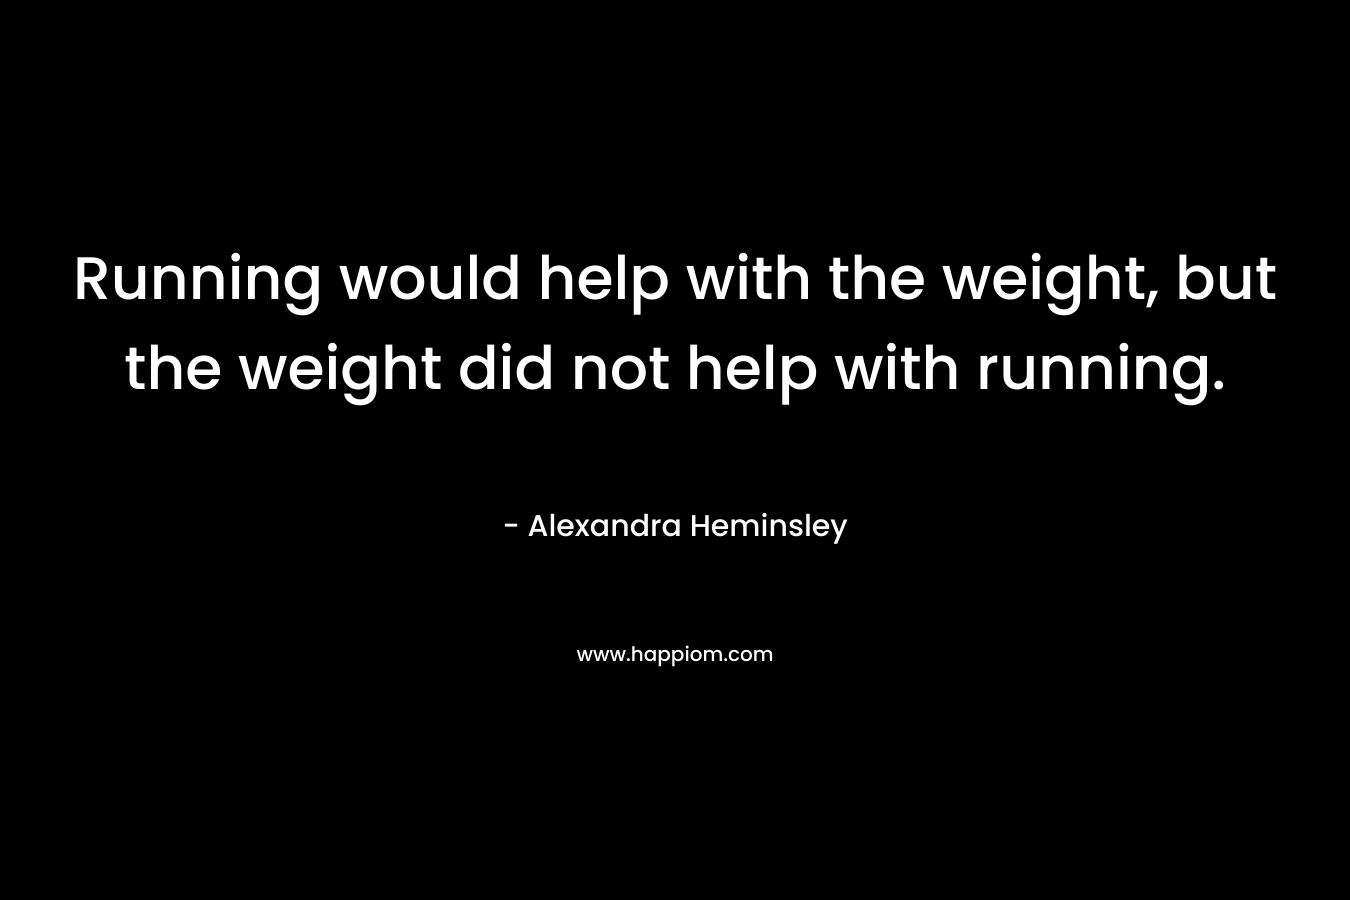 Running would help with the weight, but the weight did not help with running.